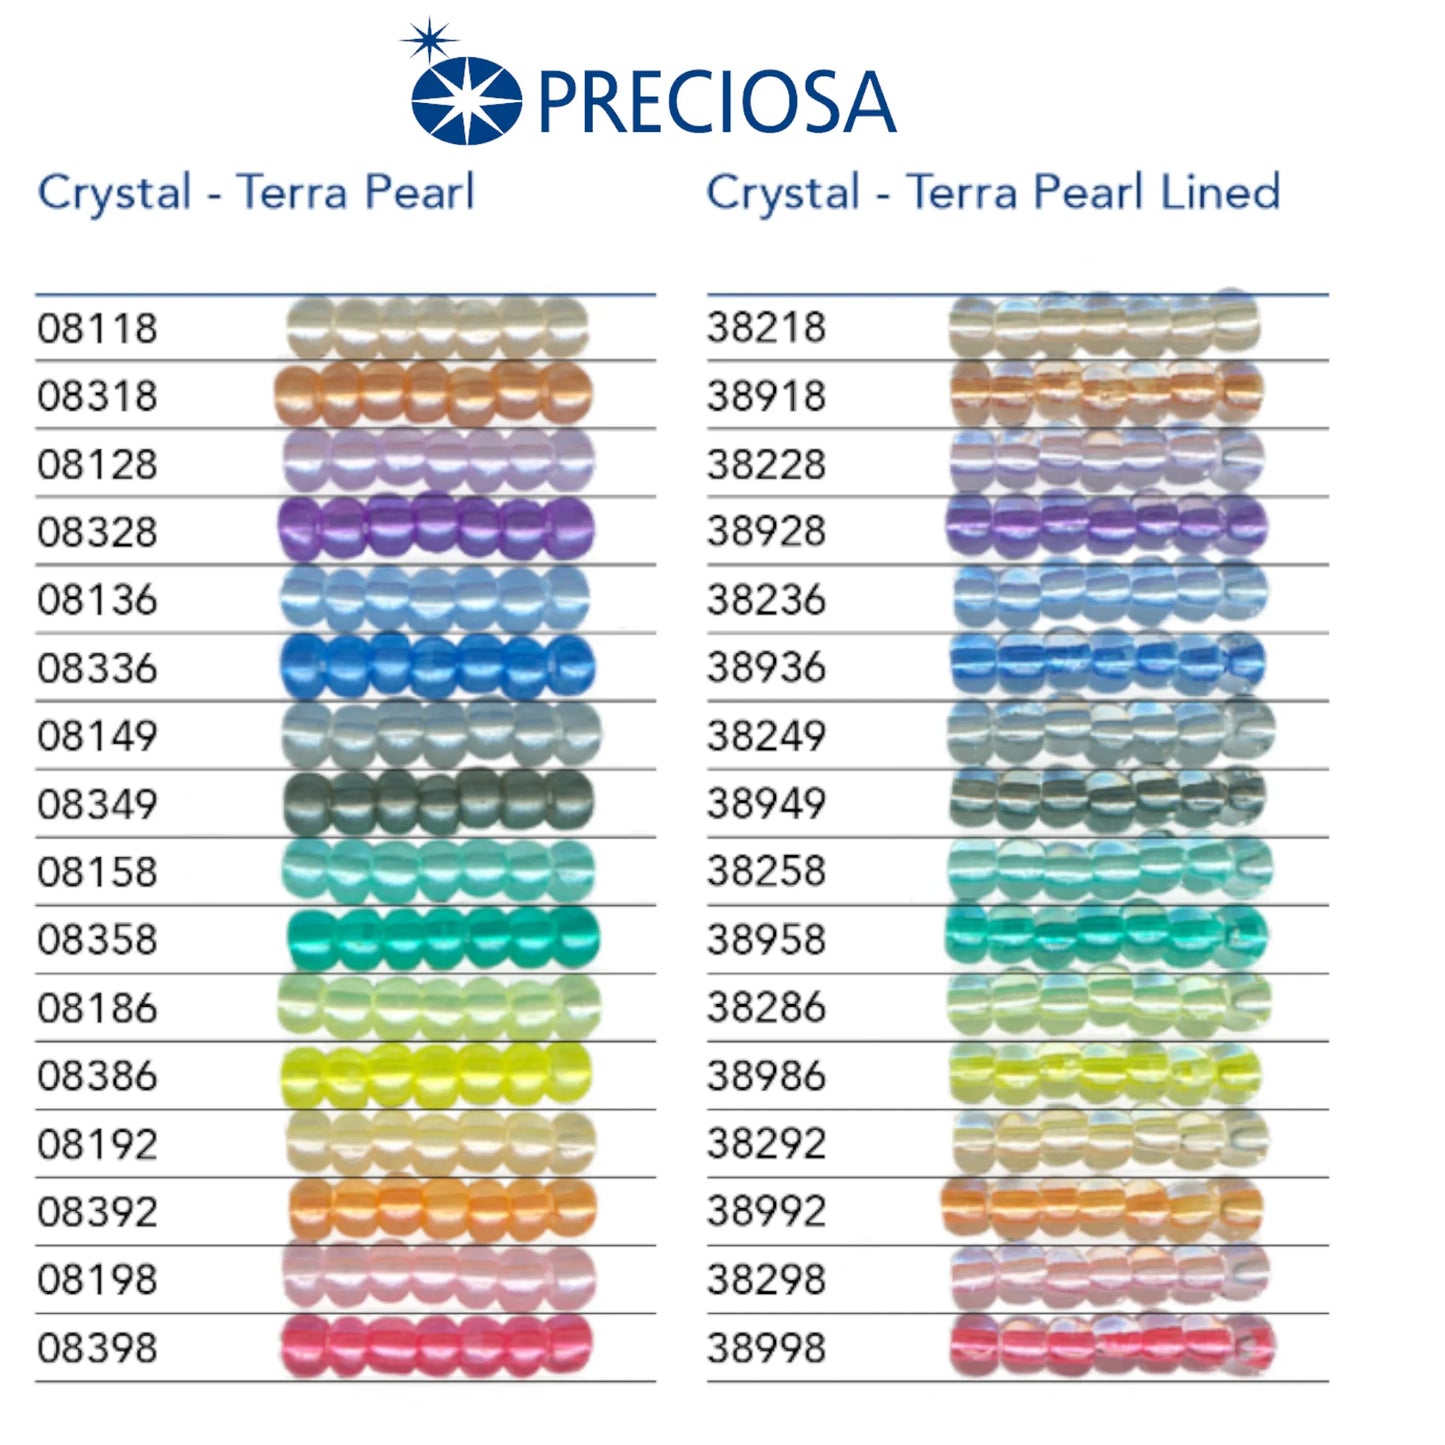 38986 Czech seed beads PRECIOSA Rocailles 10/0 yellow. Crystal - Terra Pearl Lined.